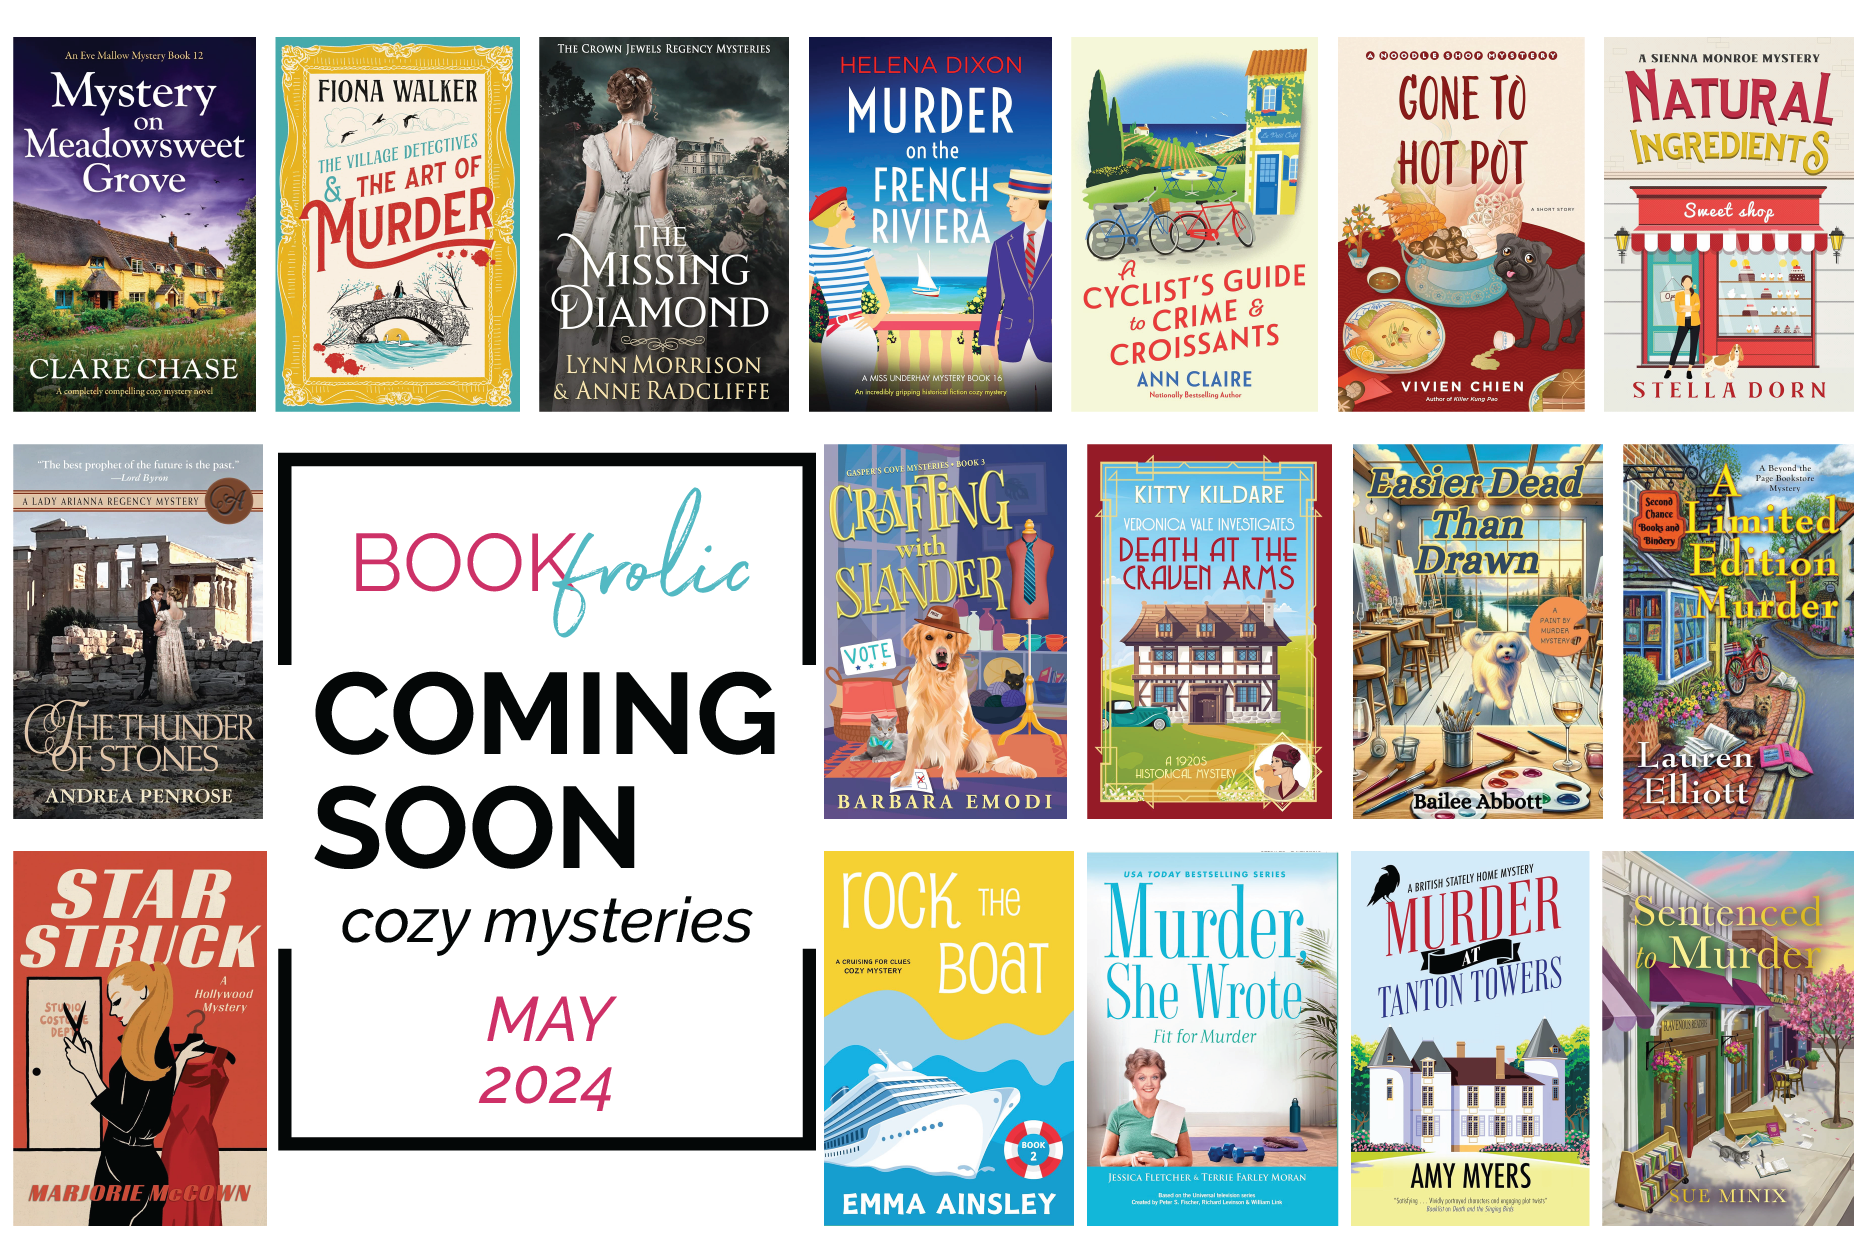 Coming Soon - Cozy Mystery releases in May 2024